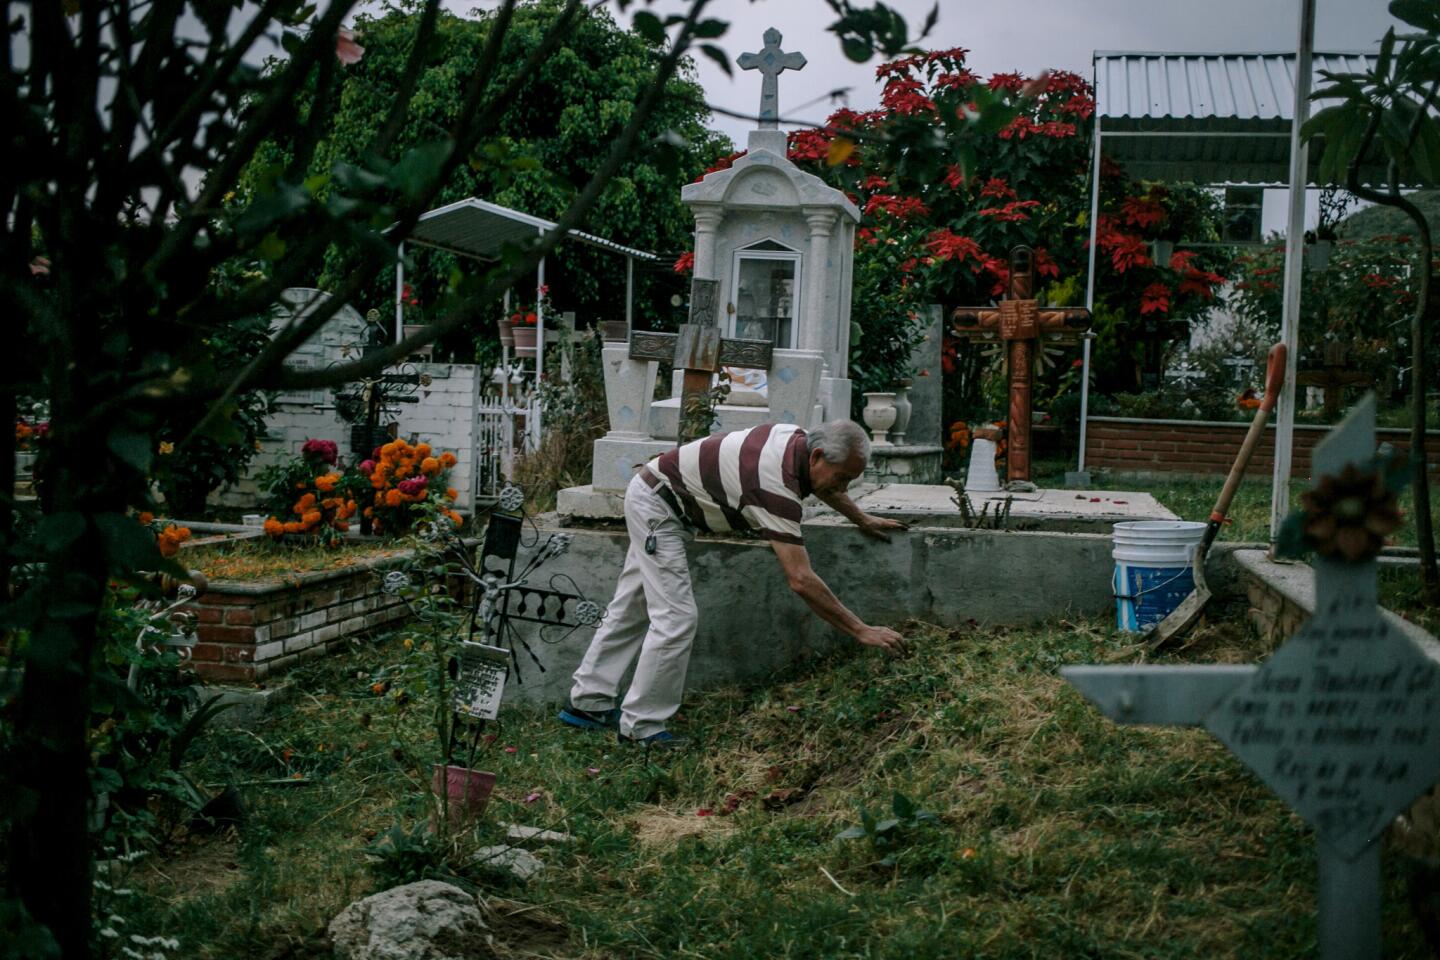 Ricardo Soto Olivar, 65, tends to the grave of his mother and father in Metepec, Puebla. It is customary to clean graves the night or day before Day of the Dead. During the September earthquake, Soto and his wife sustained about $6,000 worth of damage to the home they spent their whole lives together building.